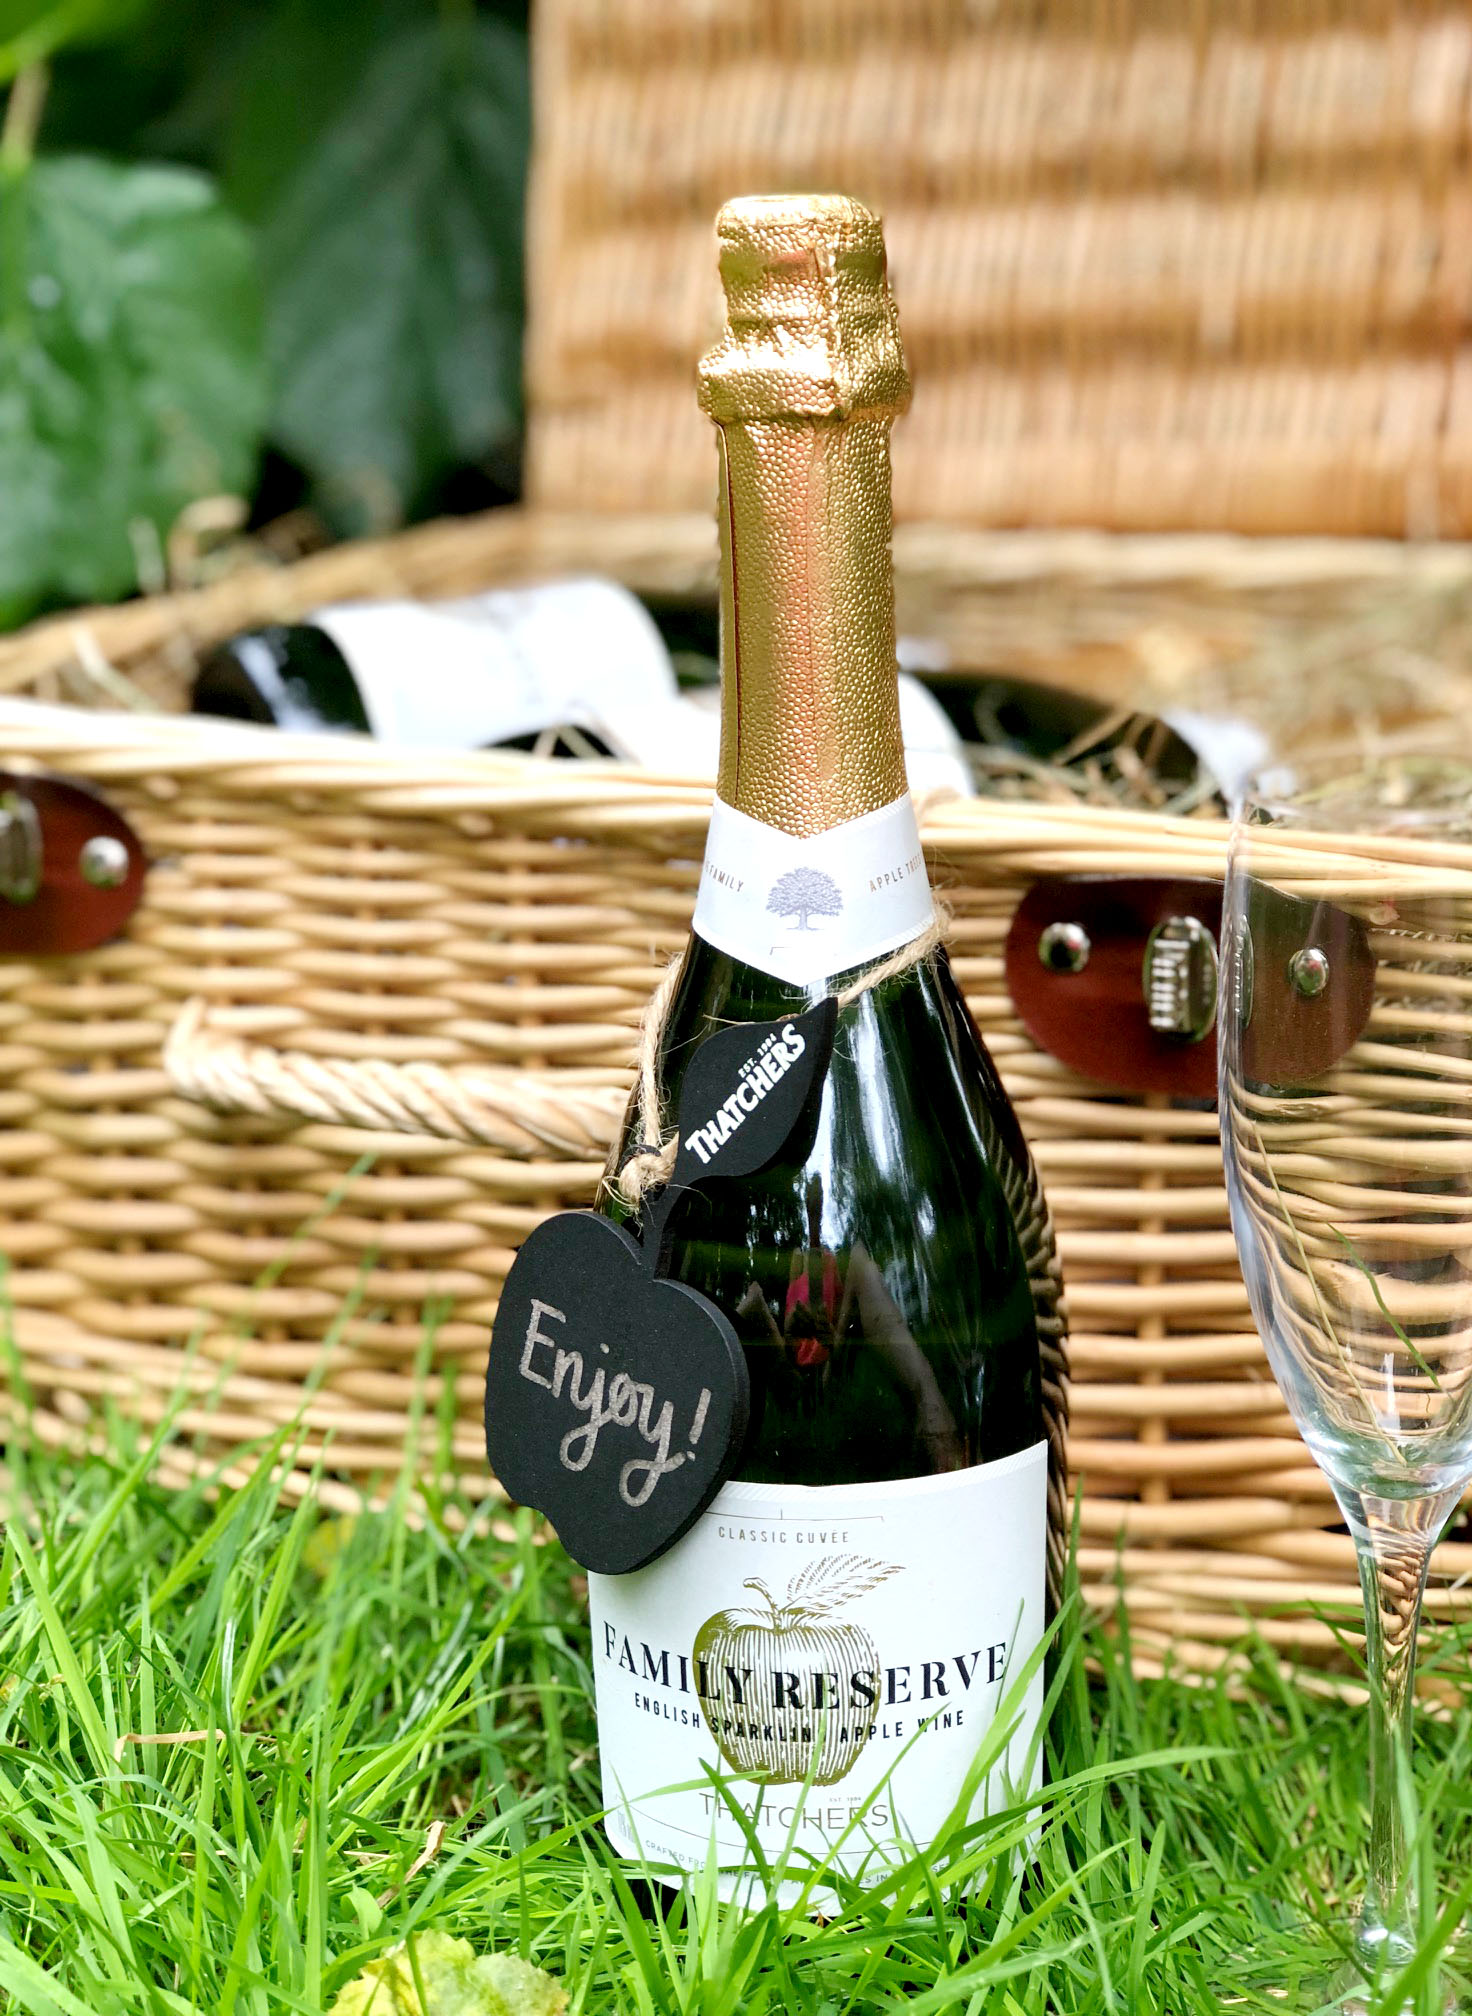 Sparkling Apple Wine – The New Champagne? from Thatchers Family Reserve